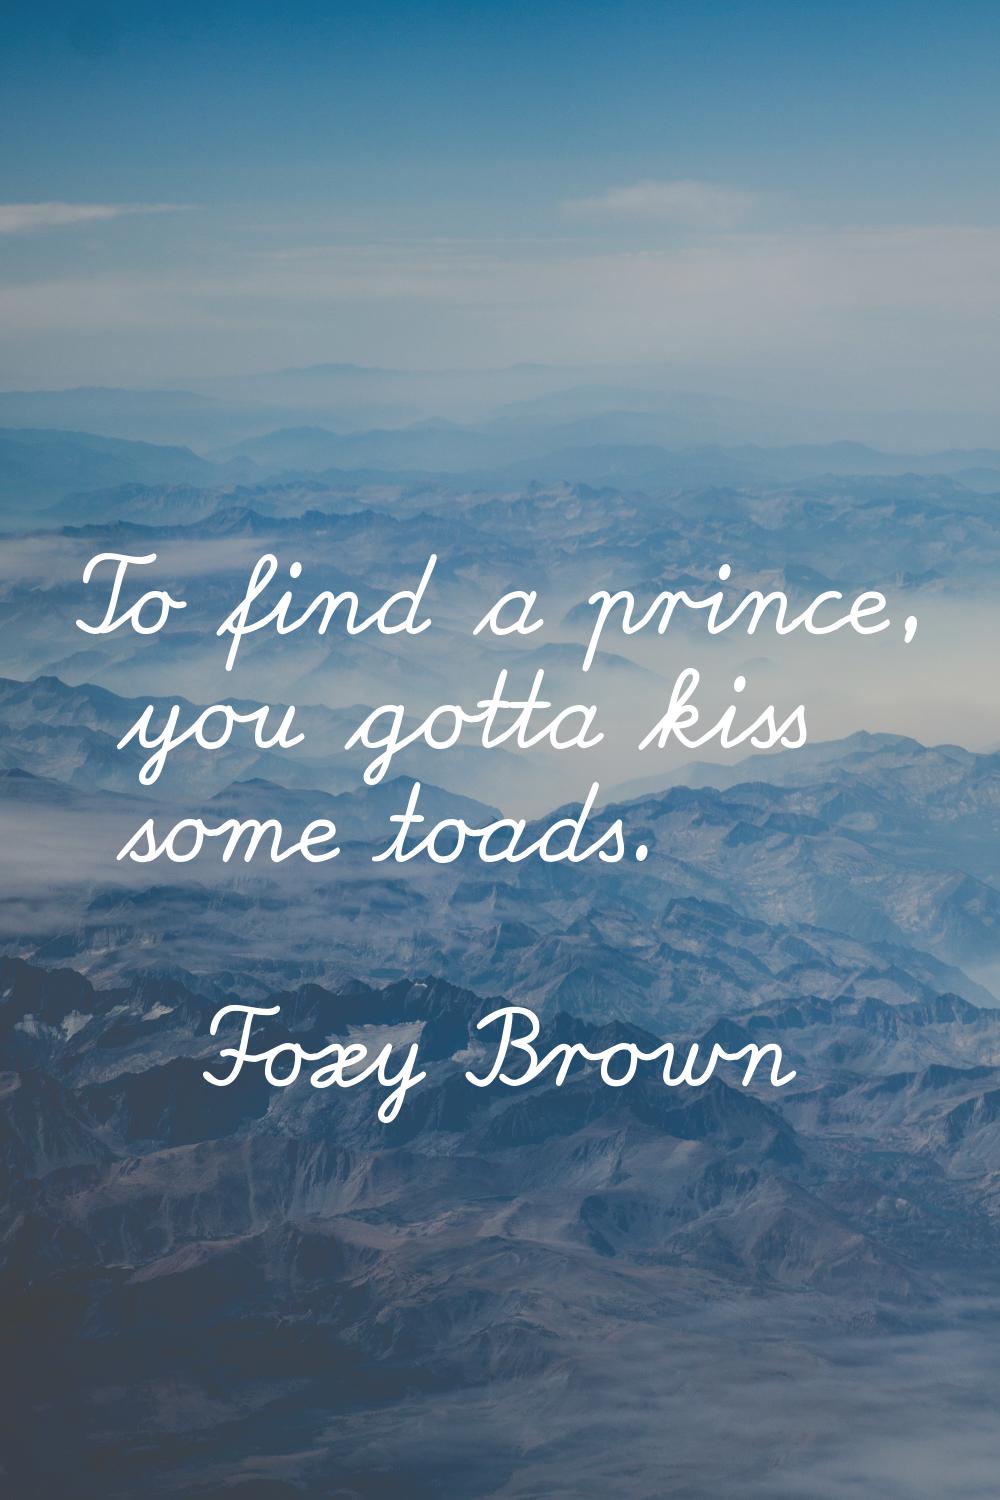 To find a prince, you gotta kiss some toads.